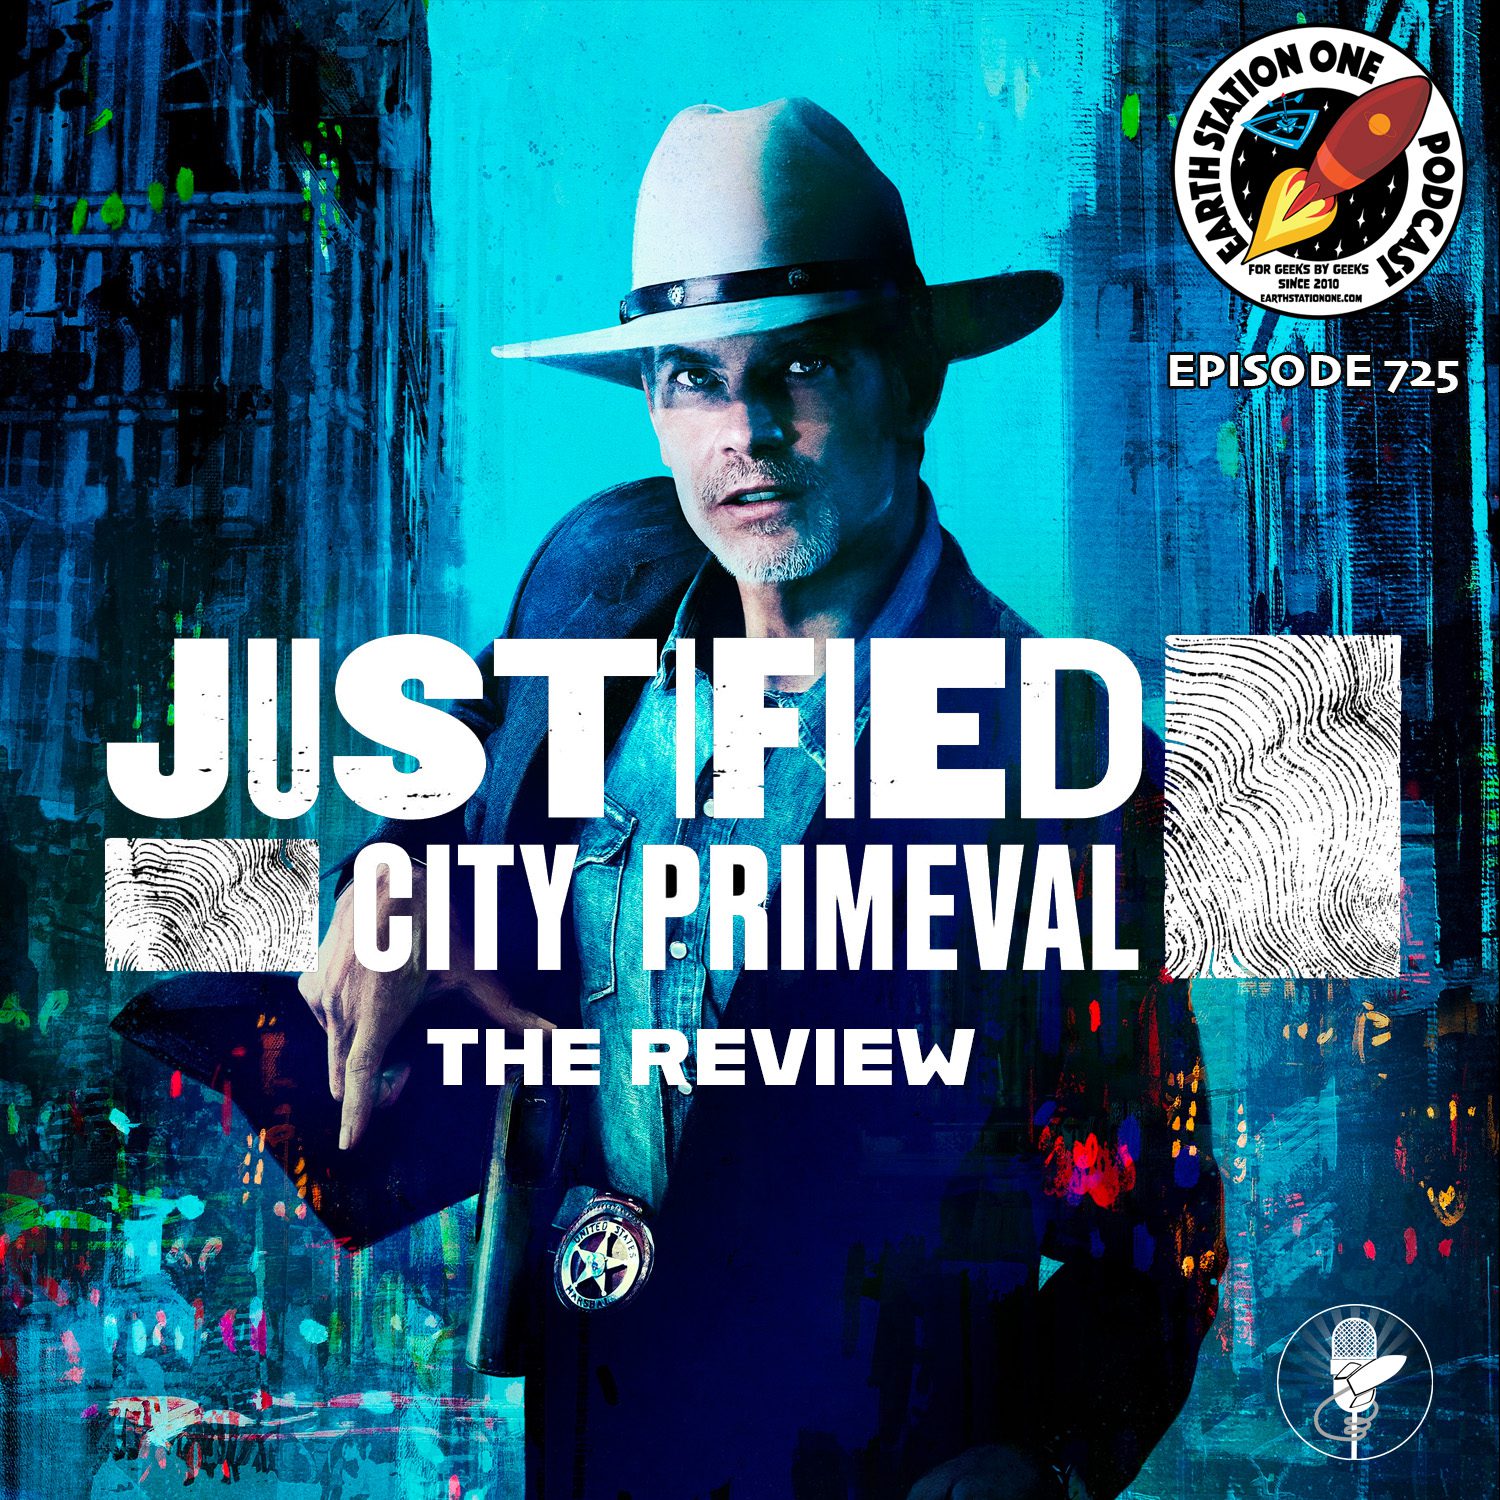 Earth Station One Ep 725 - Justified: City Primeval Review